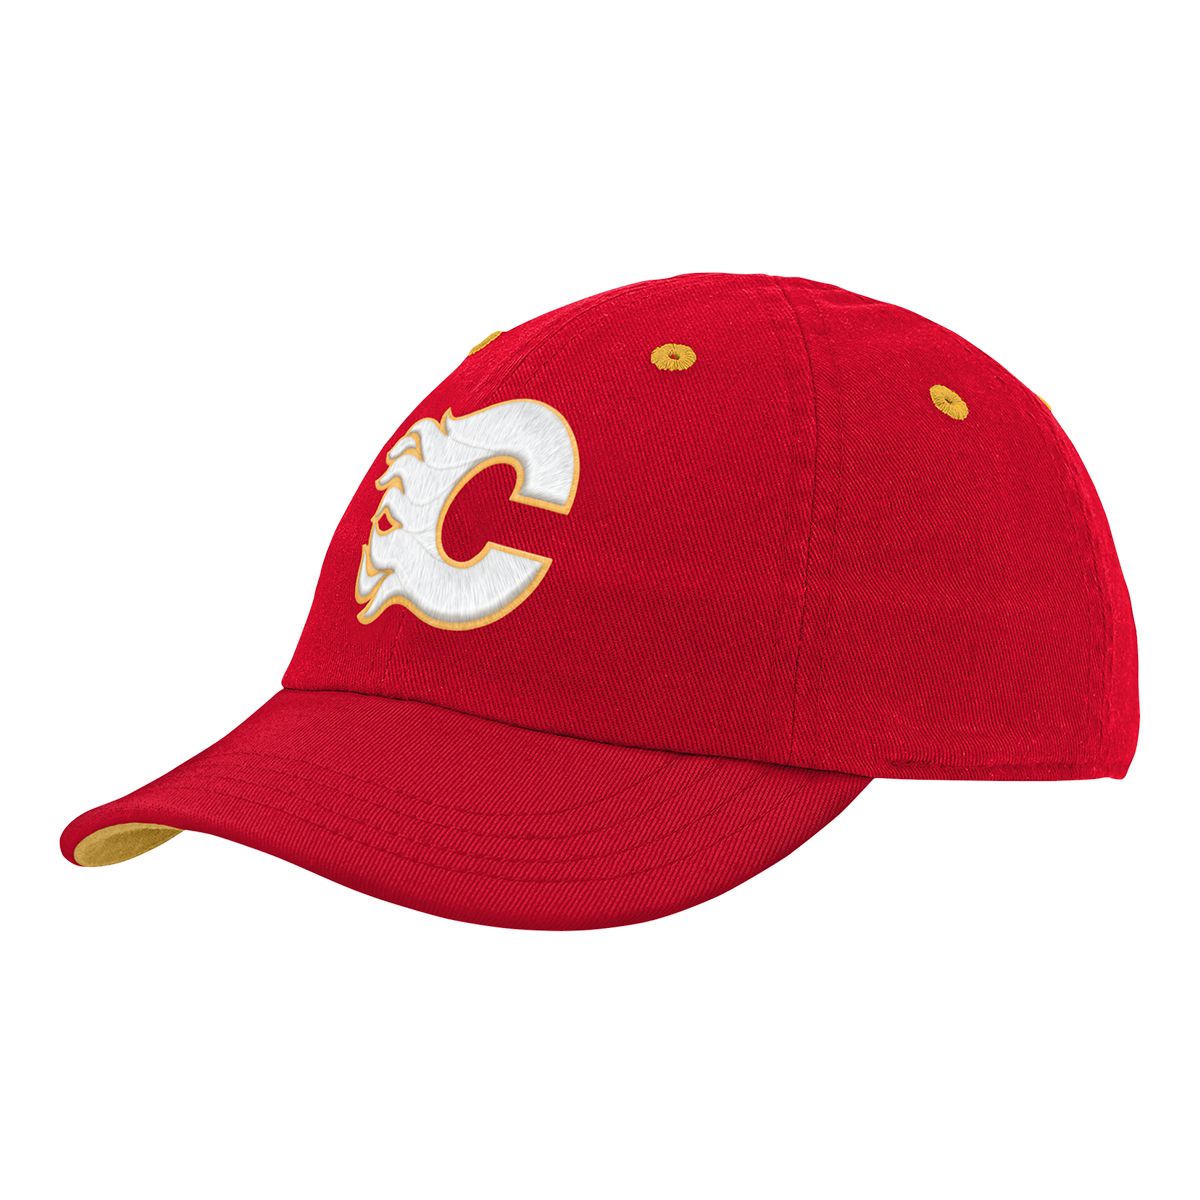 Infant Calgary Flames Slouch Cap